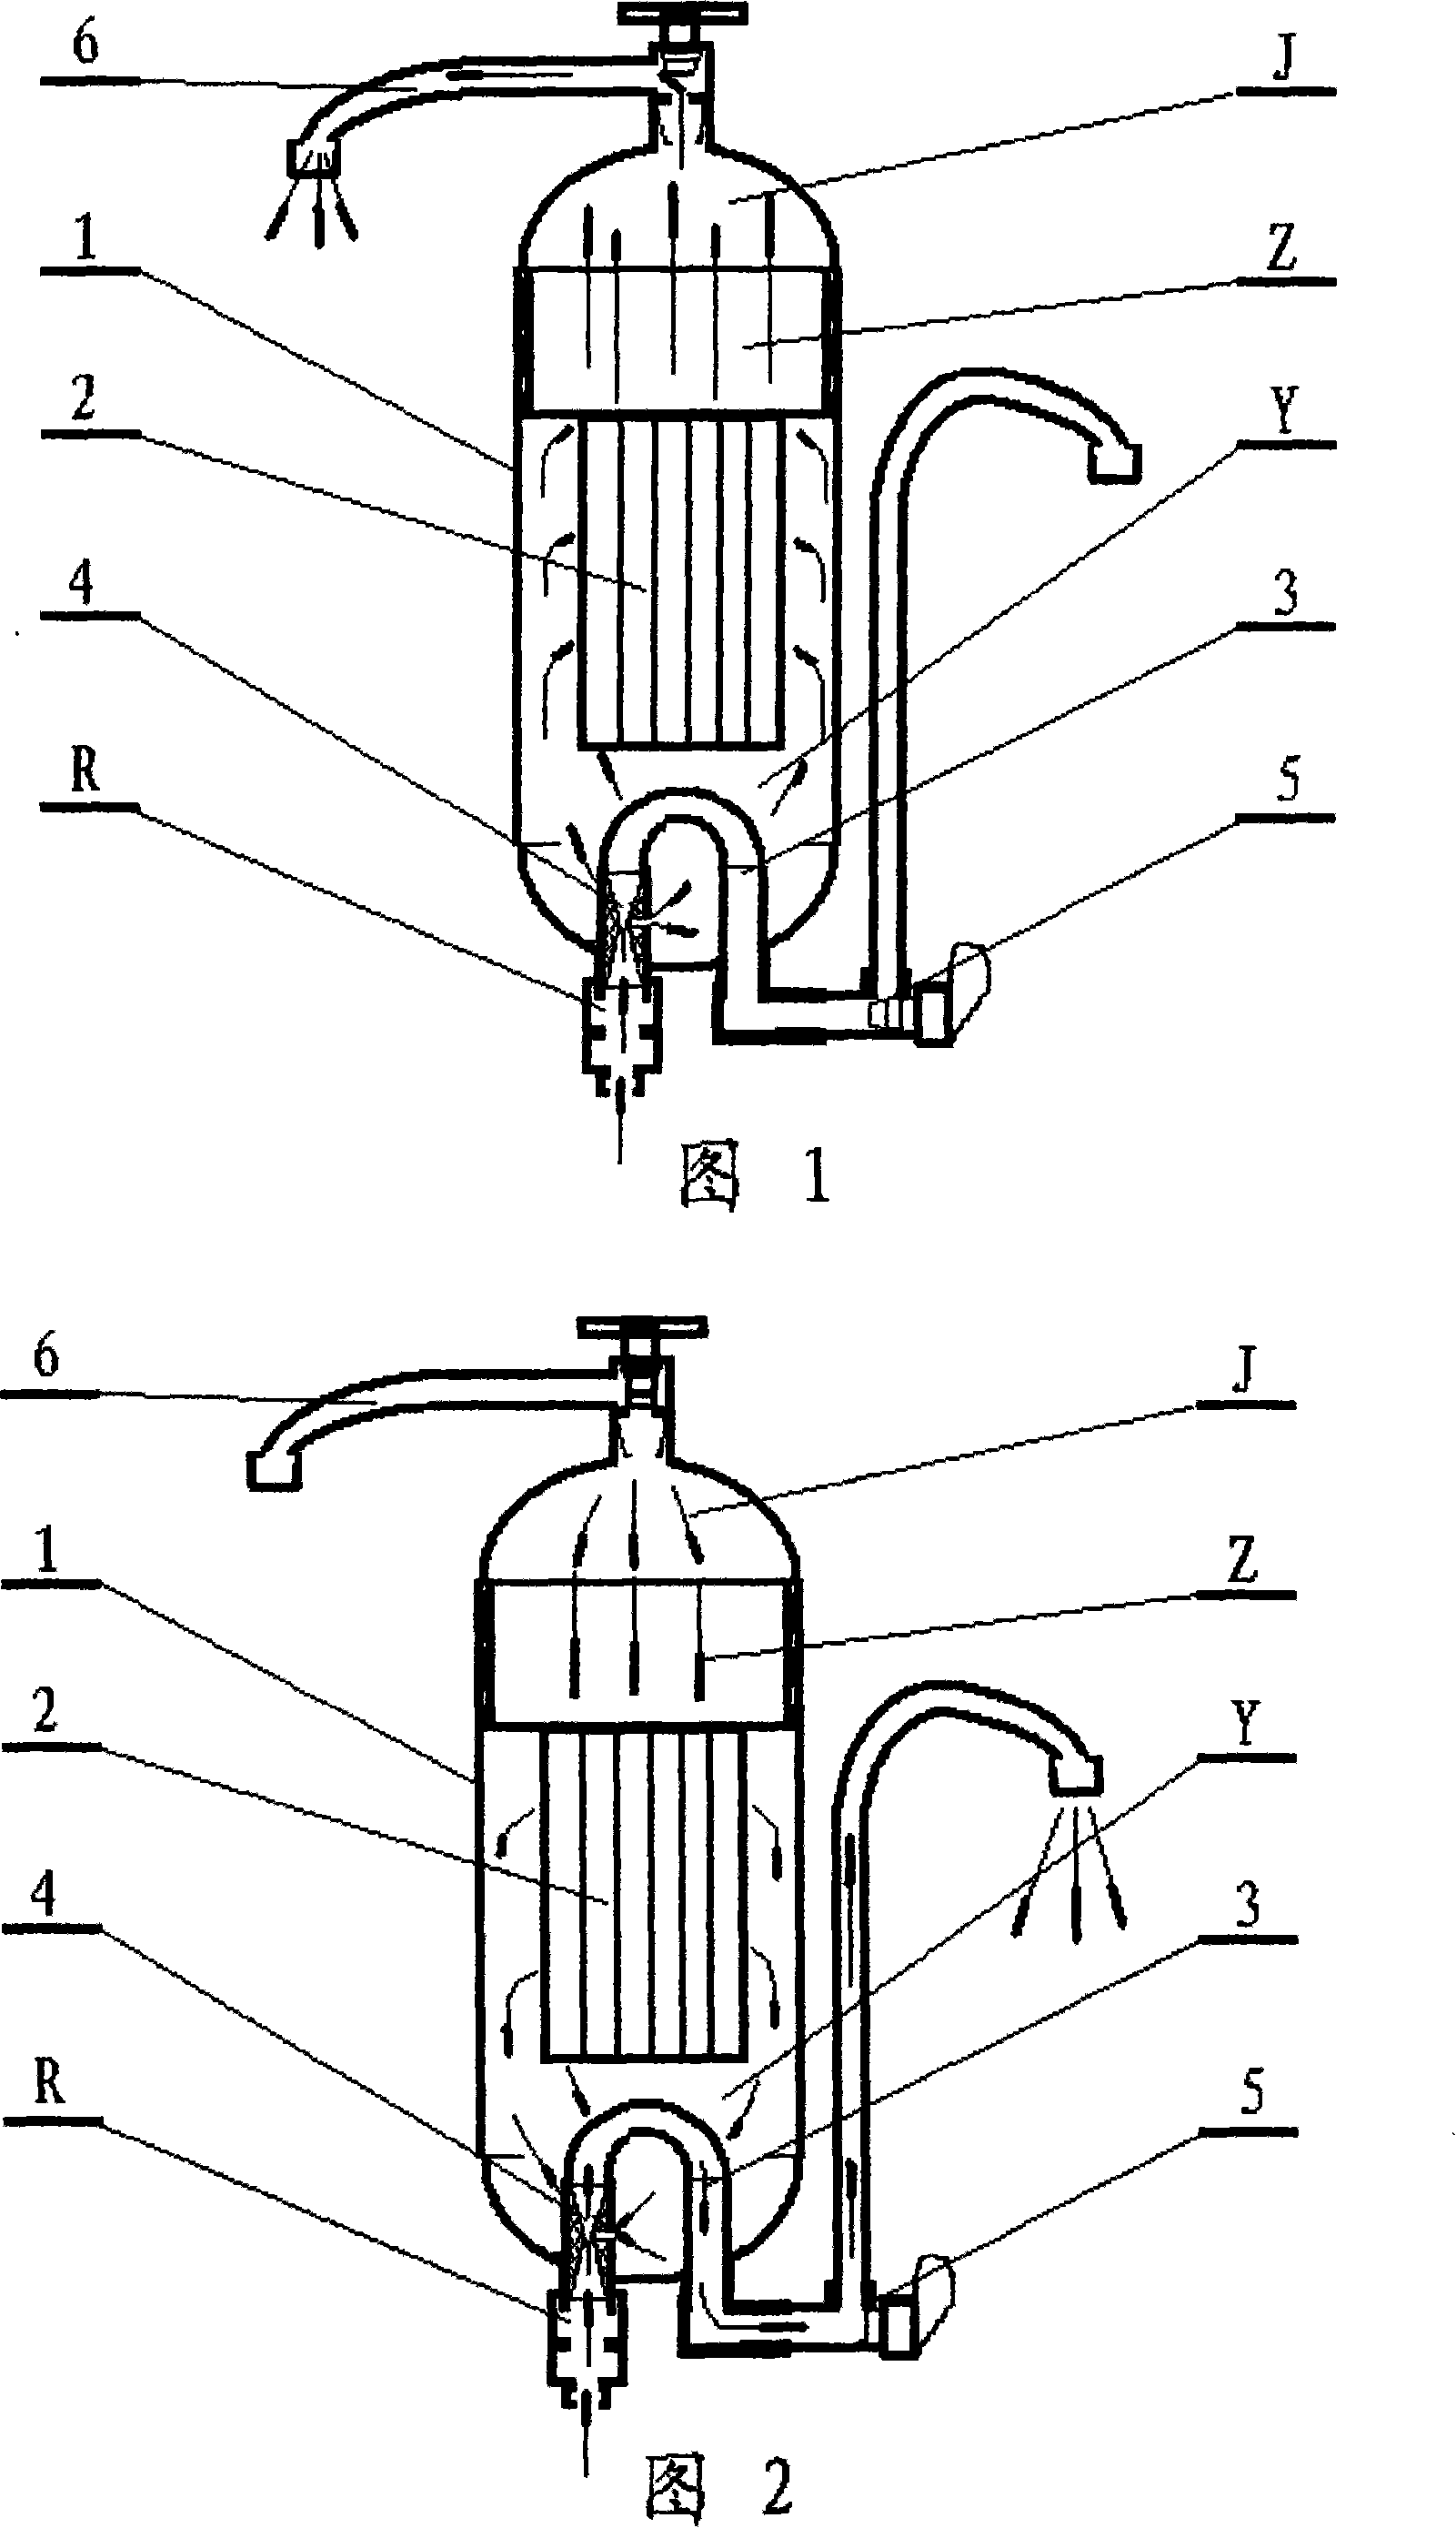 Method and apparatus for self-washing of filter